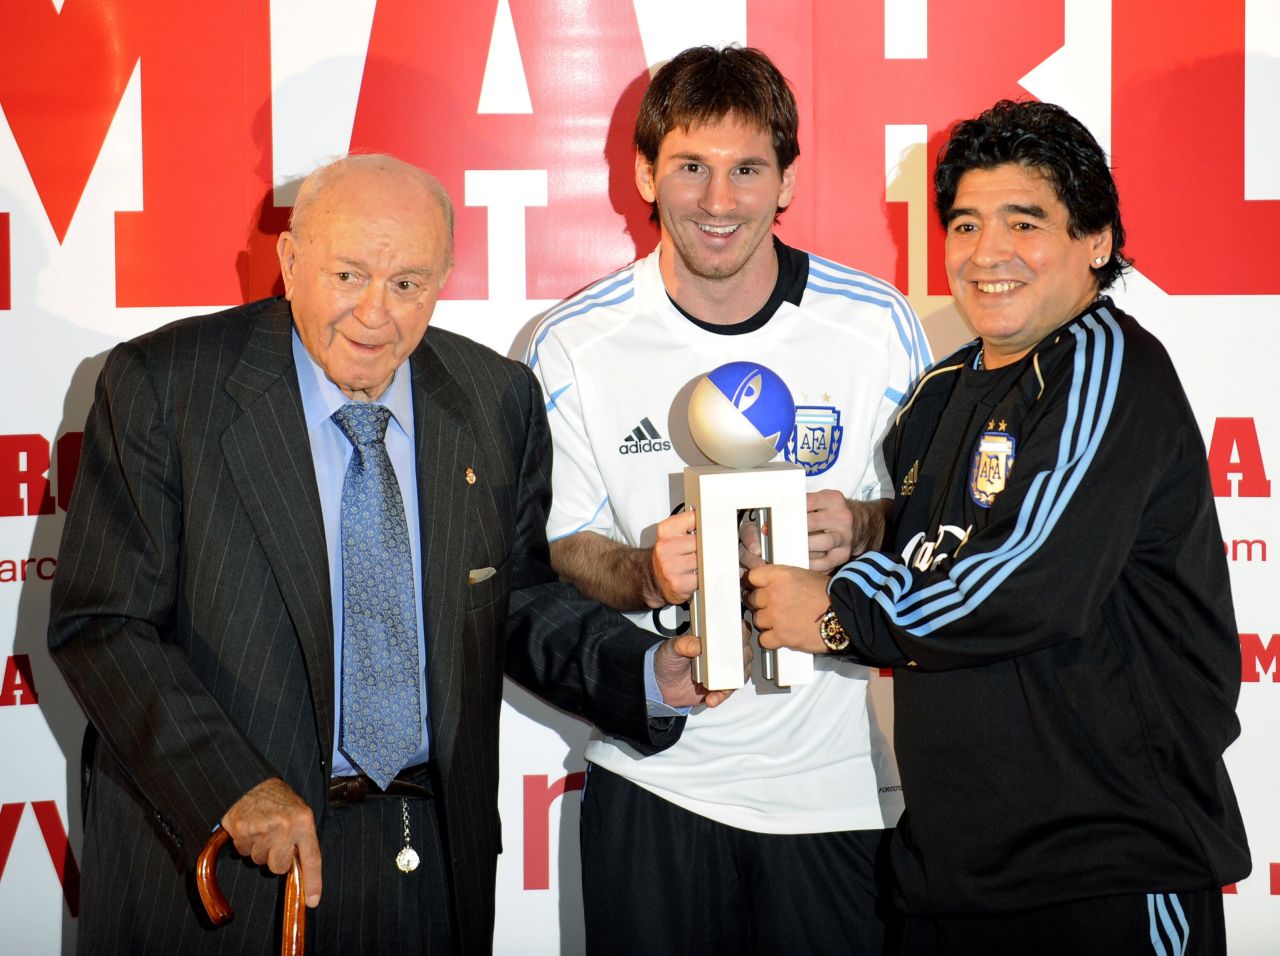 Di Stefano with Argentinian football legends Lionel Messi and Diego  Maradona, the then-coach of the national team, after Messi received the Di Stefano award for best player of the 2008-2009 season.